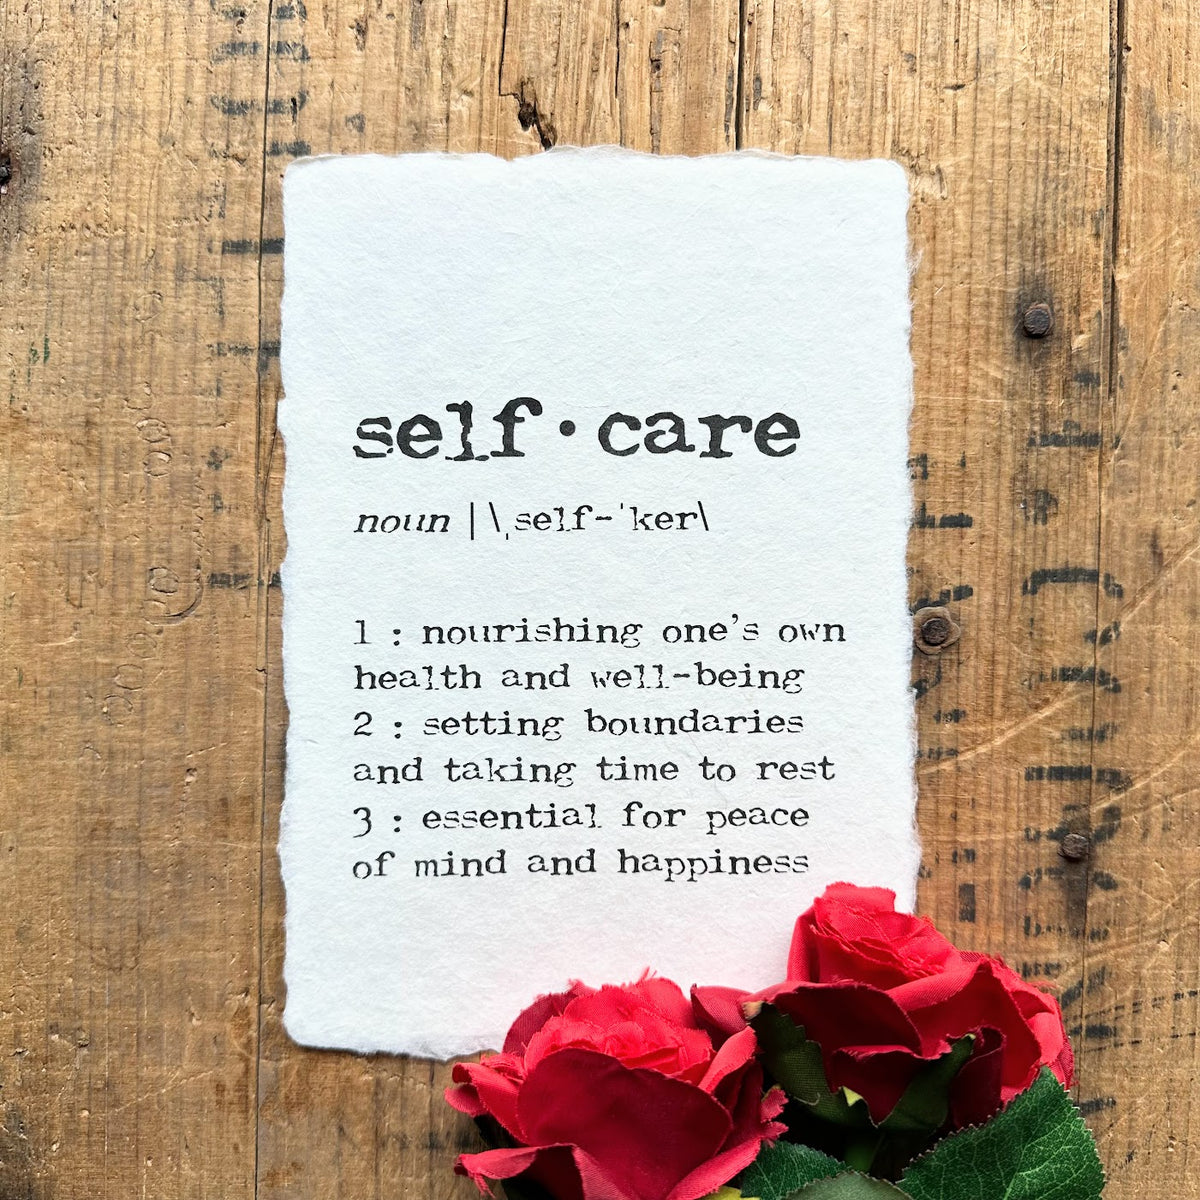 What Is Self-Care? The Definition Of Self Care - Wellbeing Center